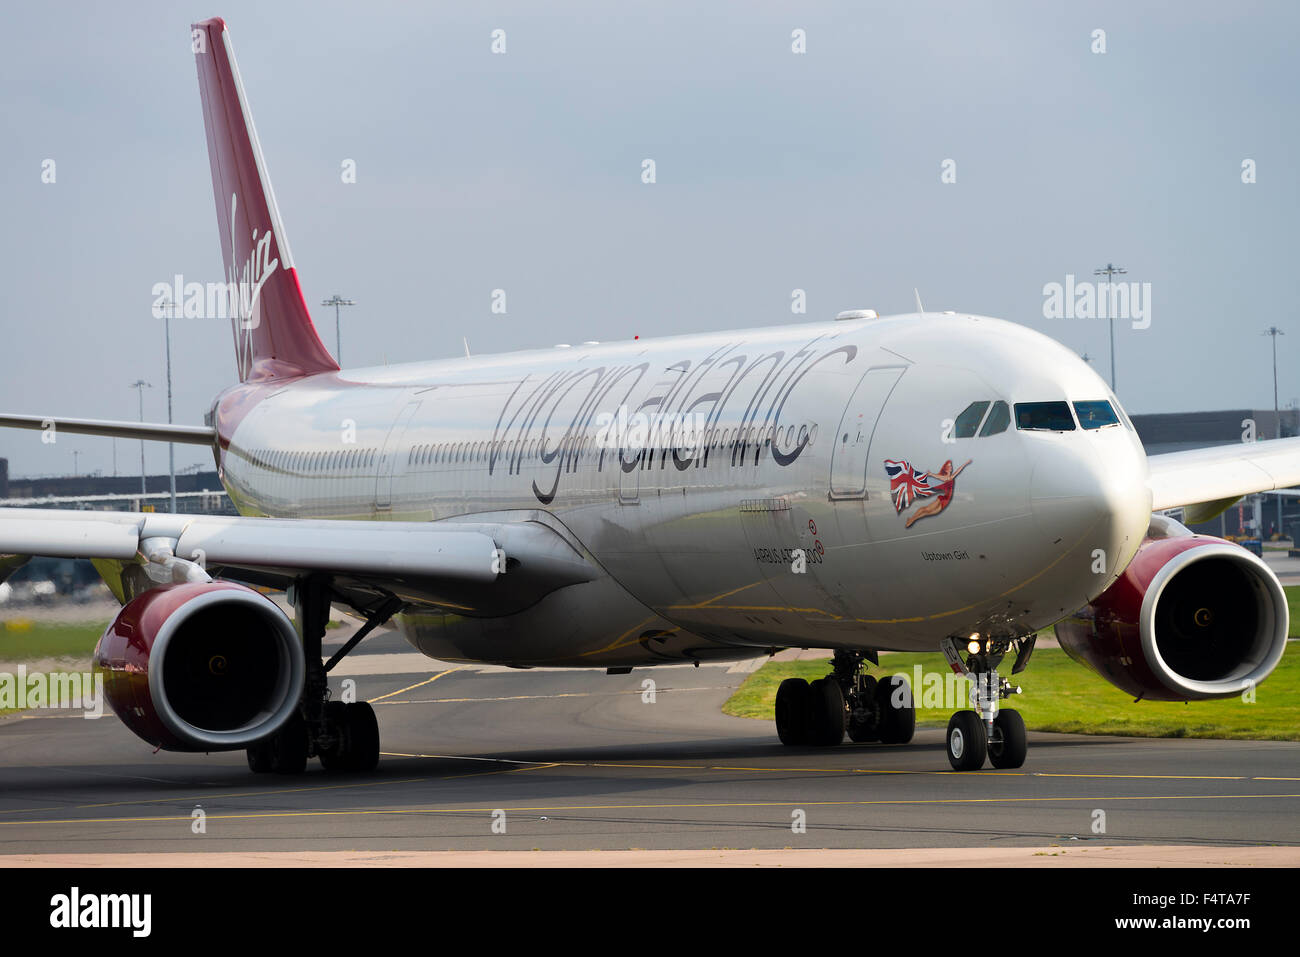 Virgin Atlantic Airways Airbus A330-343 Airliner G-VNYC Taxiing for Departure at Manchester International Airport England UK Stock Photo